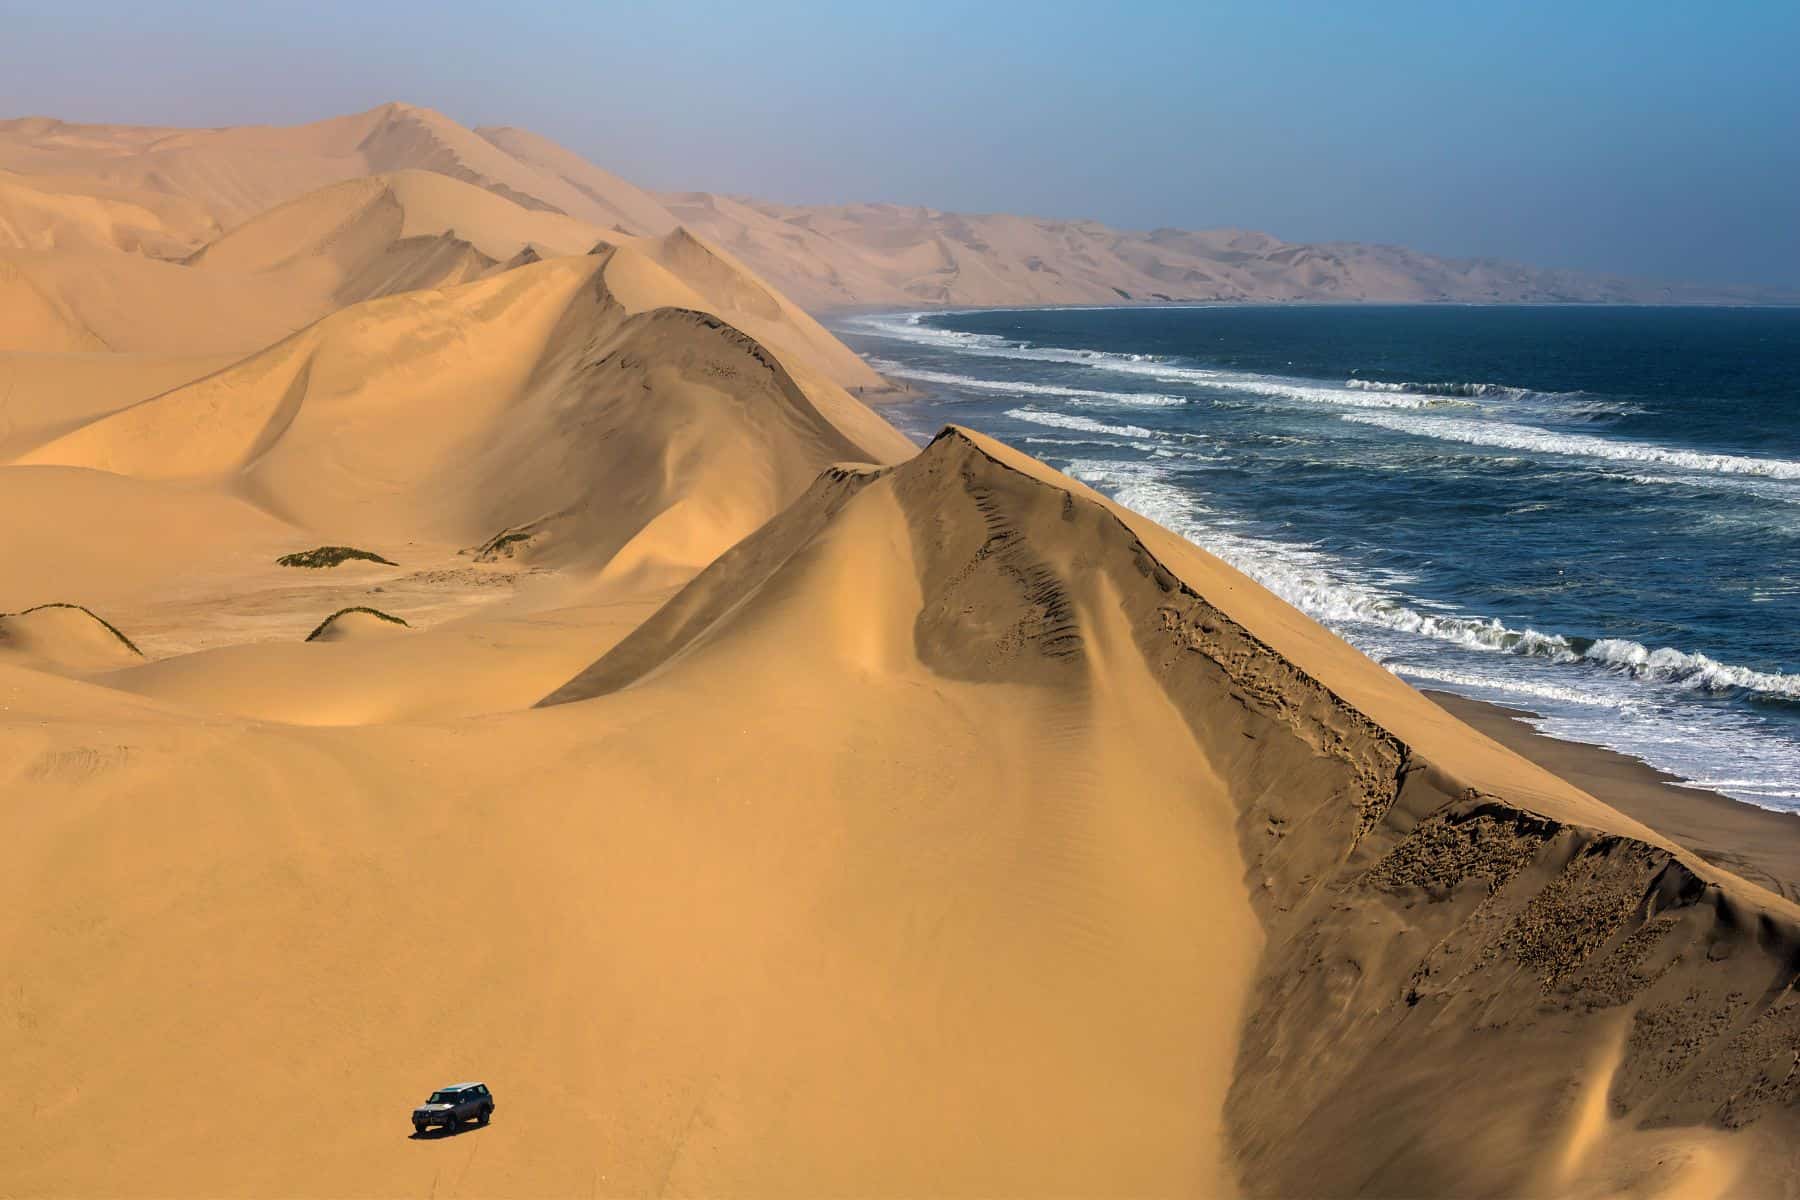 The Namib desert as it borders the sea, a vehicle on a self-drive safari in the foreground